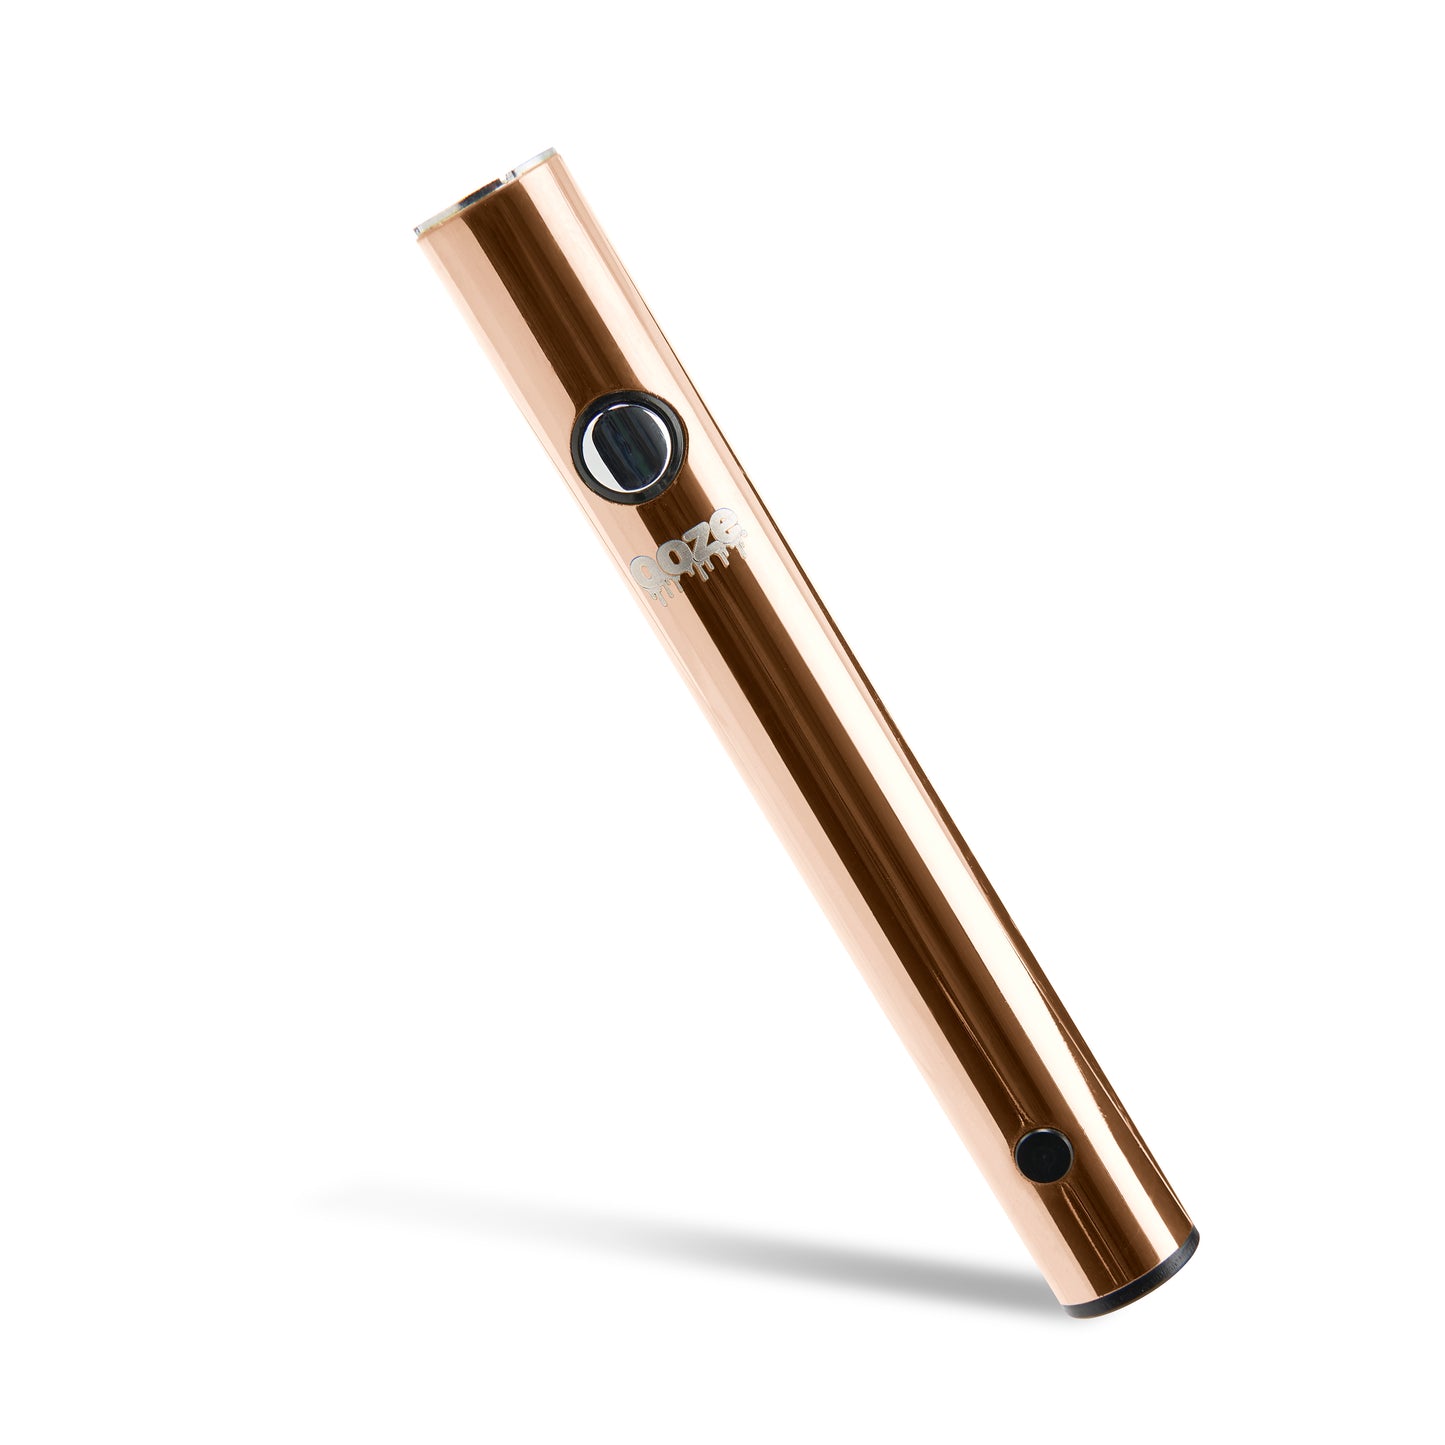 The rose gold Ooze Wink is leaning at a 45 degree angle